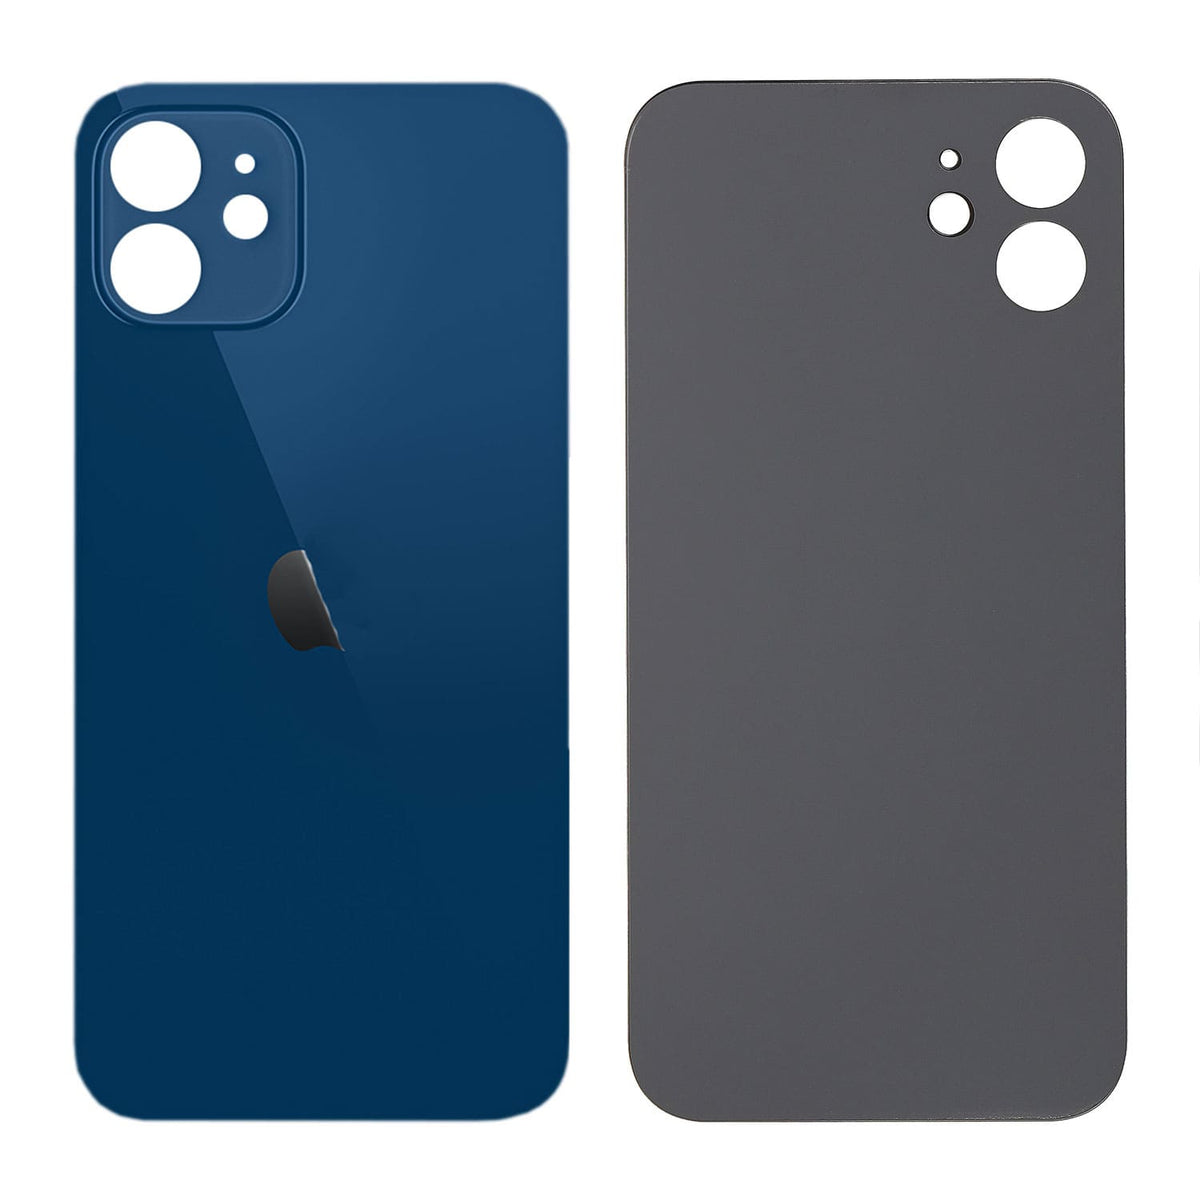 BACK COVER FOR IPHONE 12 MINI - BLUE